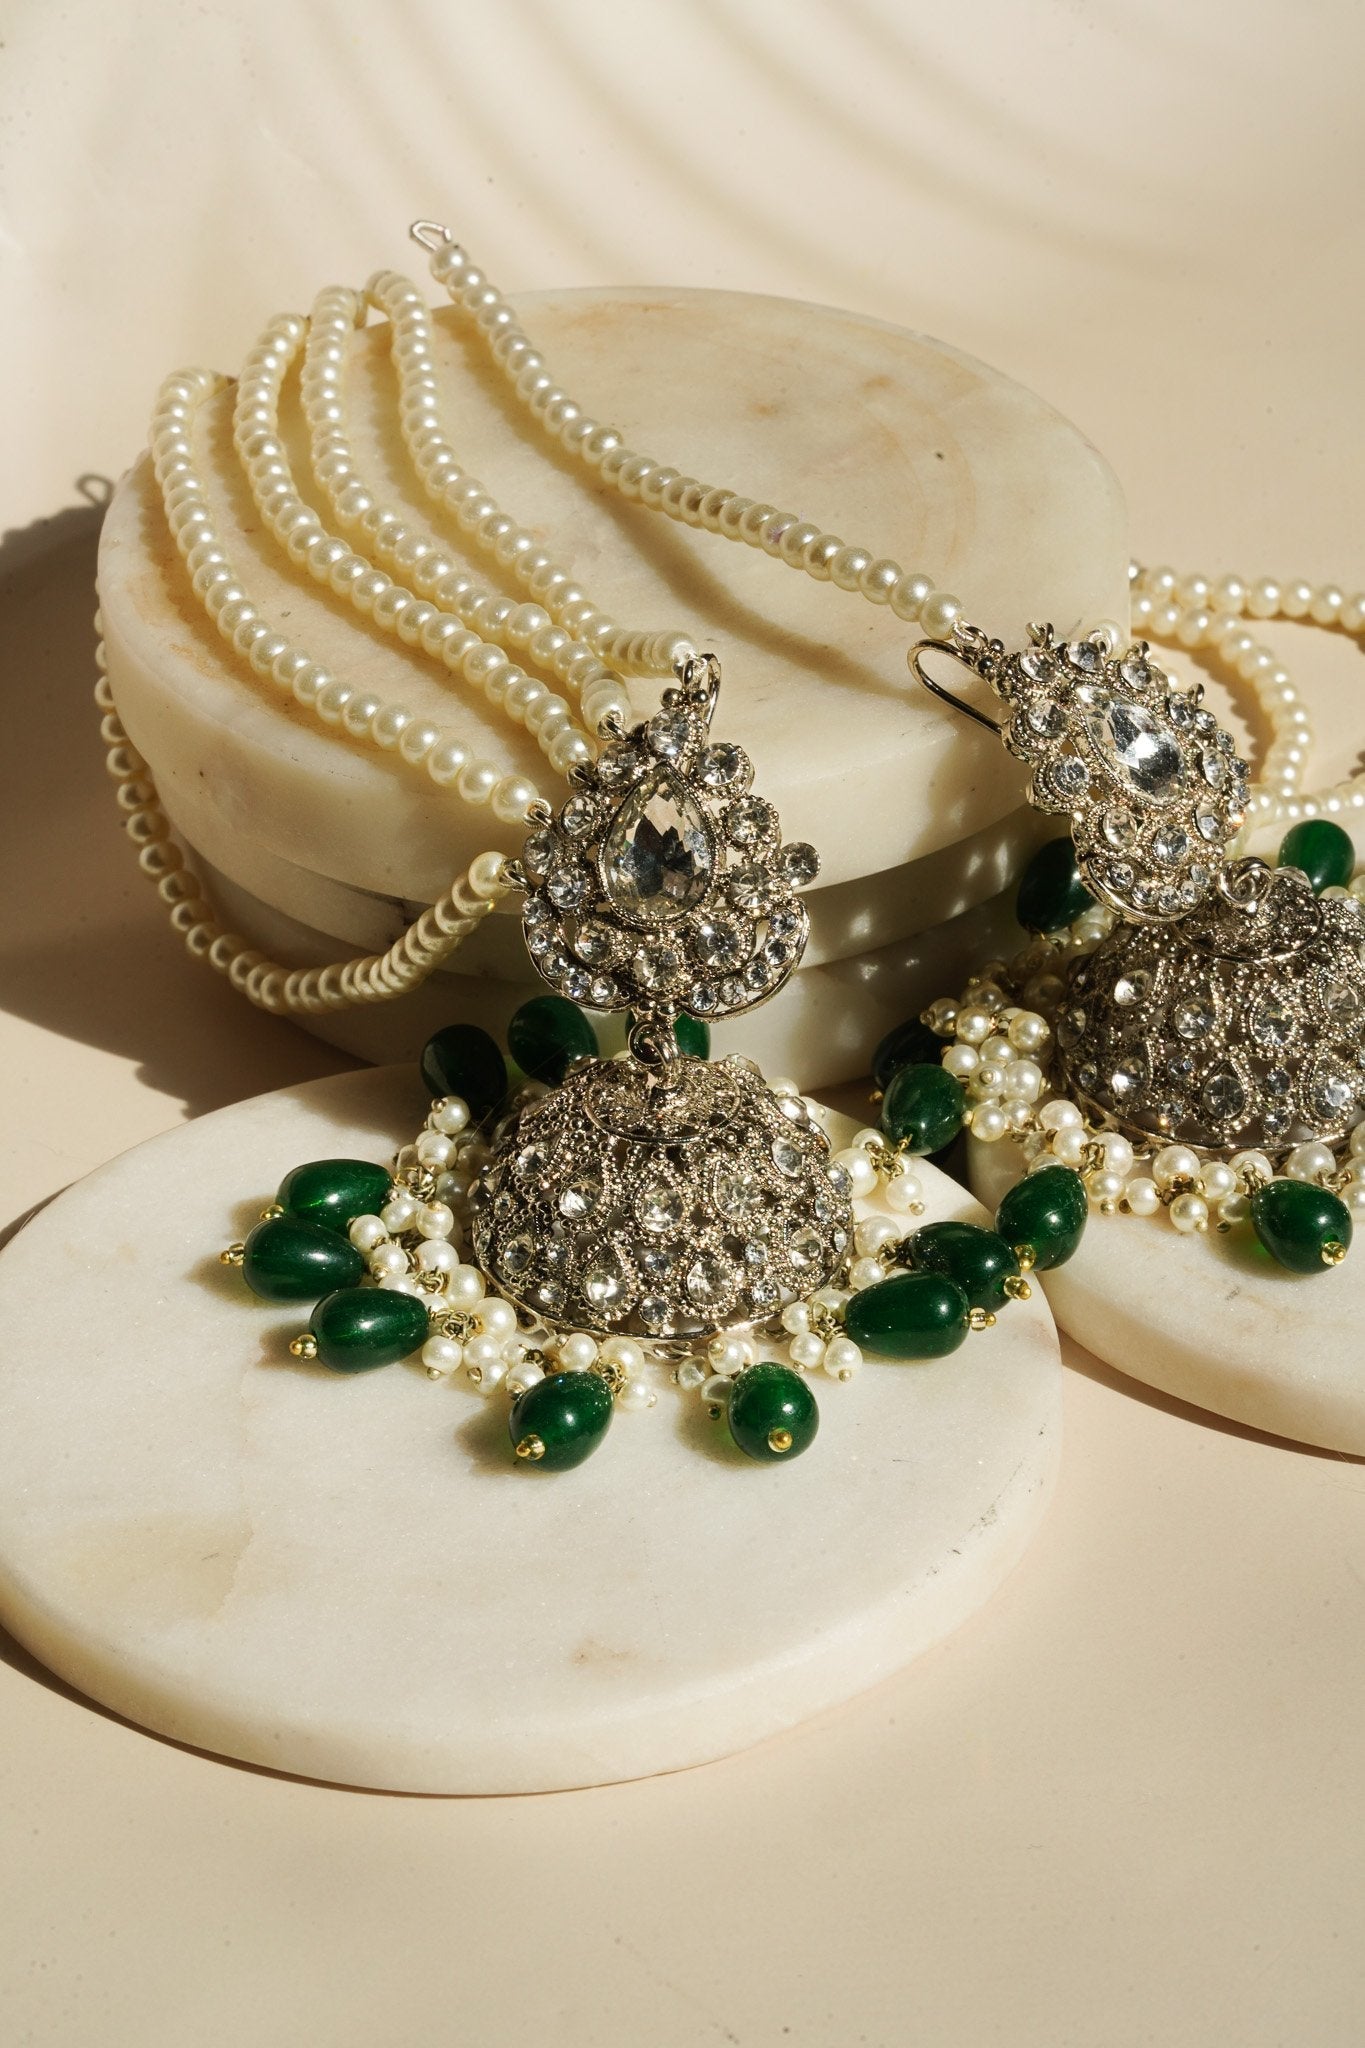 Sareena - Silver and Green Necklace Set with Earrings, Maang Tikka and Jhoomer Optional Choker Necklace Set from Inaury